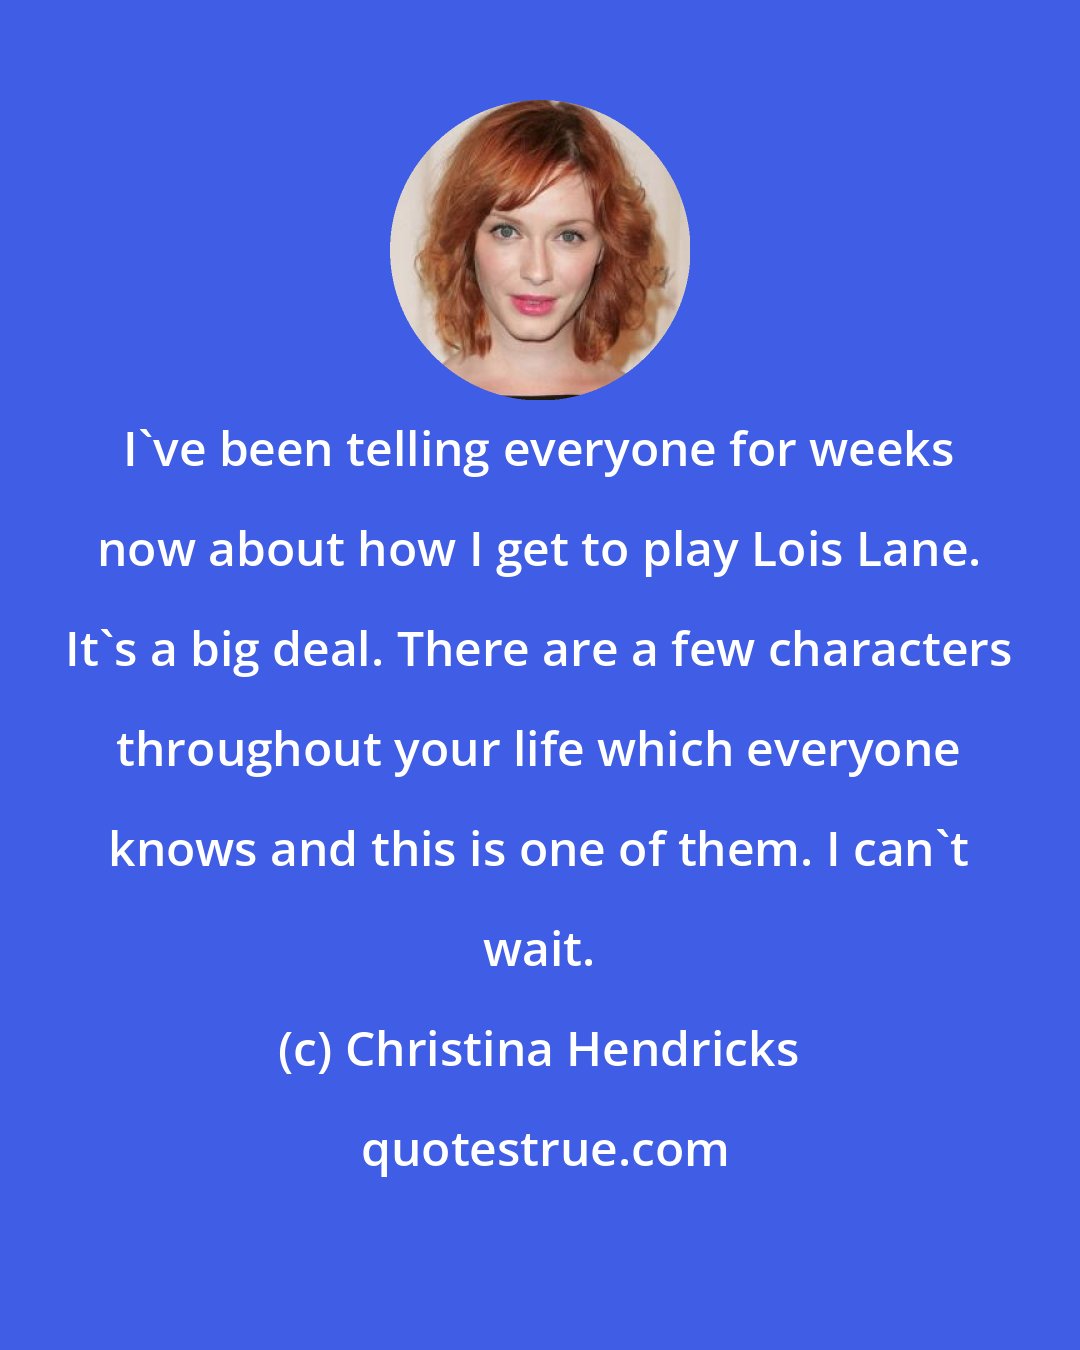 Christina Hendricks: I've been telling everyone for weeks now about how I get to play Lois Lane. It's a big deal. There are a few characters throughout your life which everyone knows and this is one of them. I can't wait.